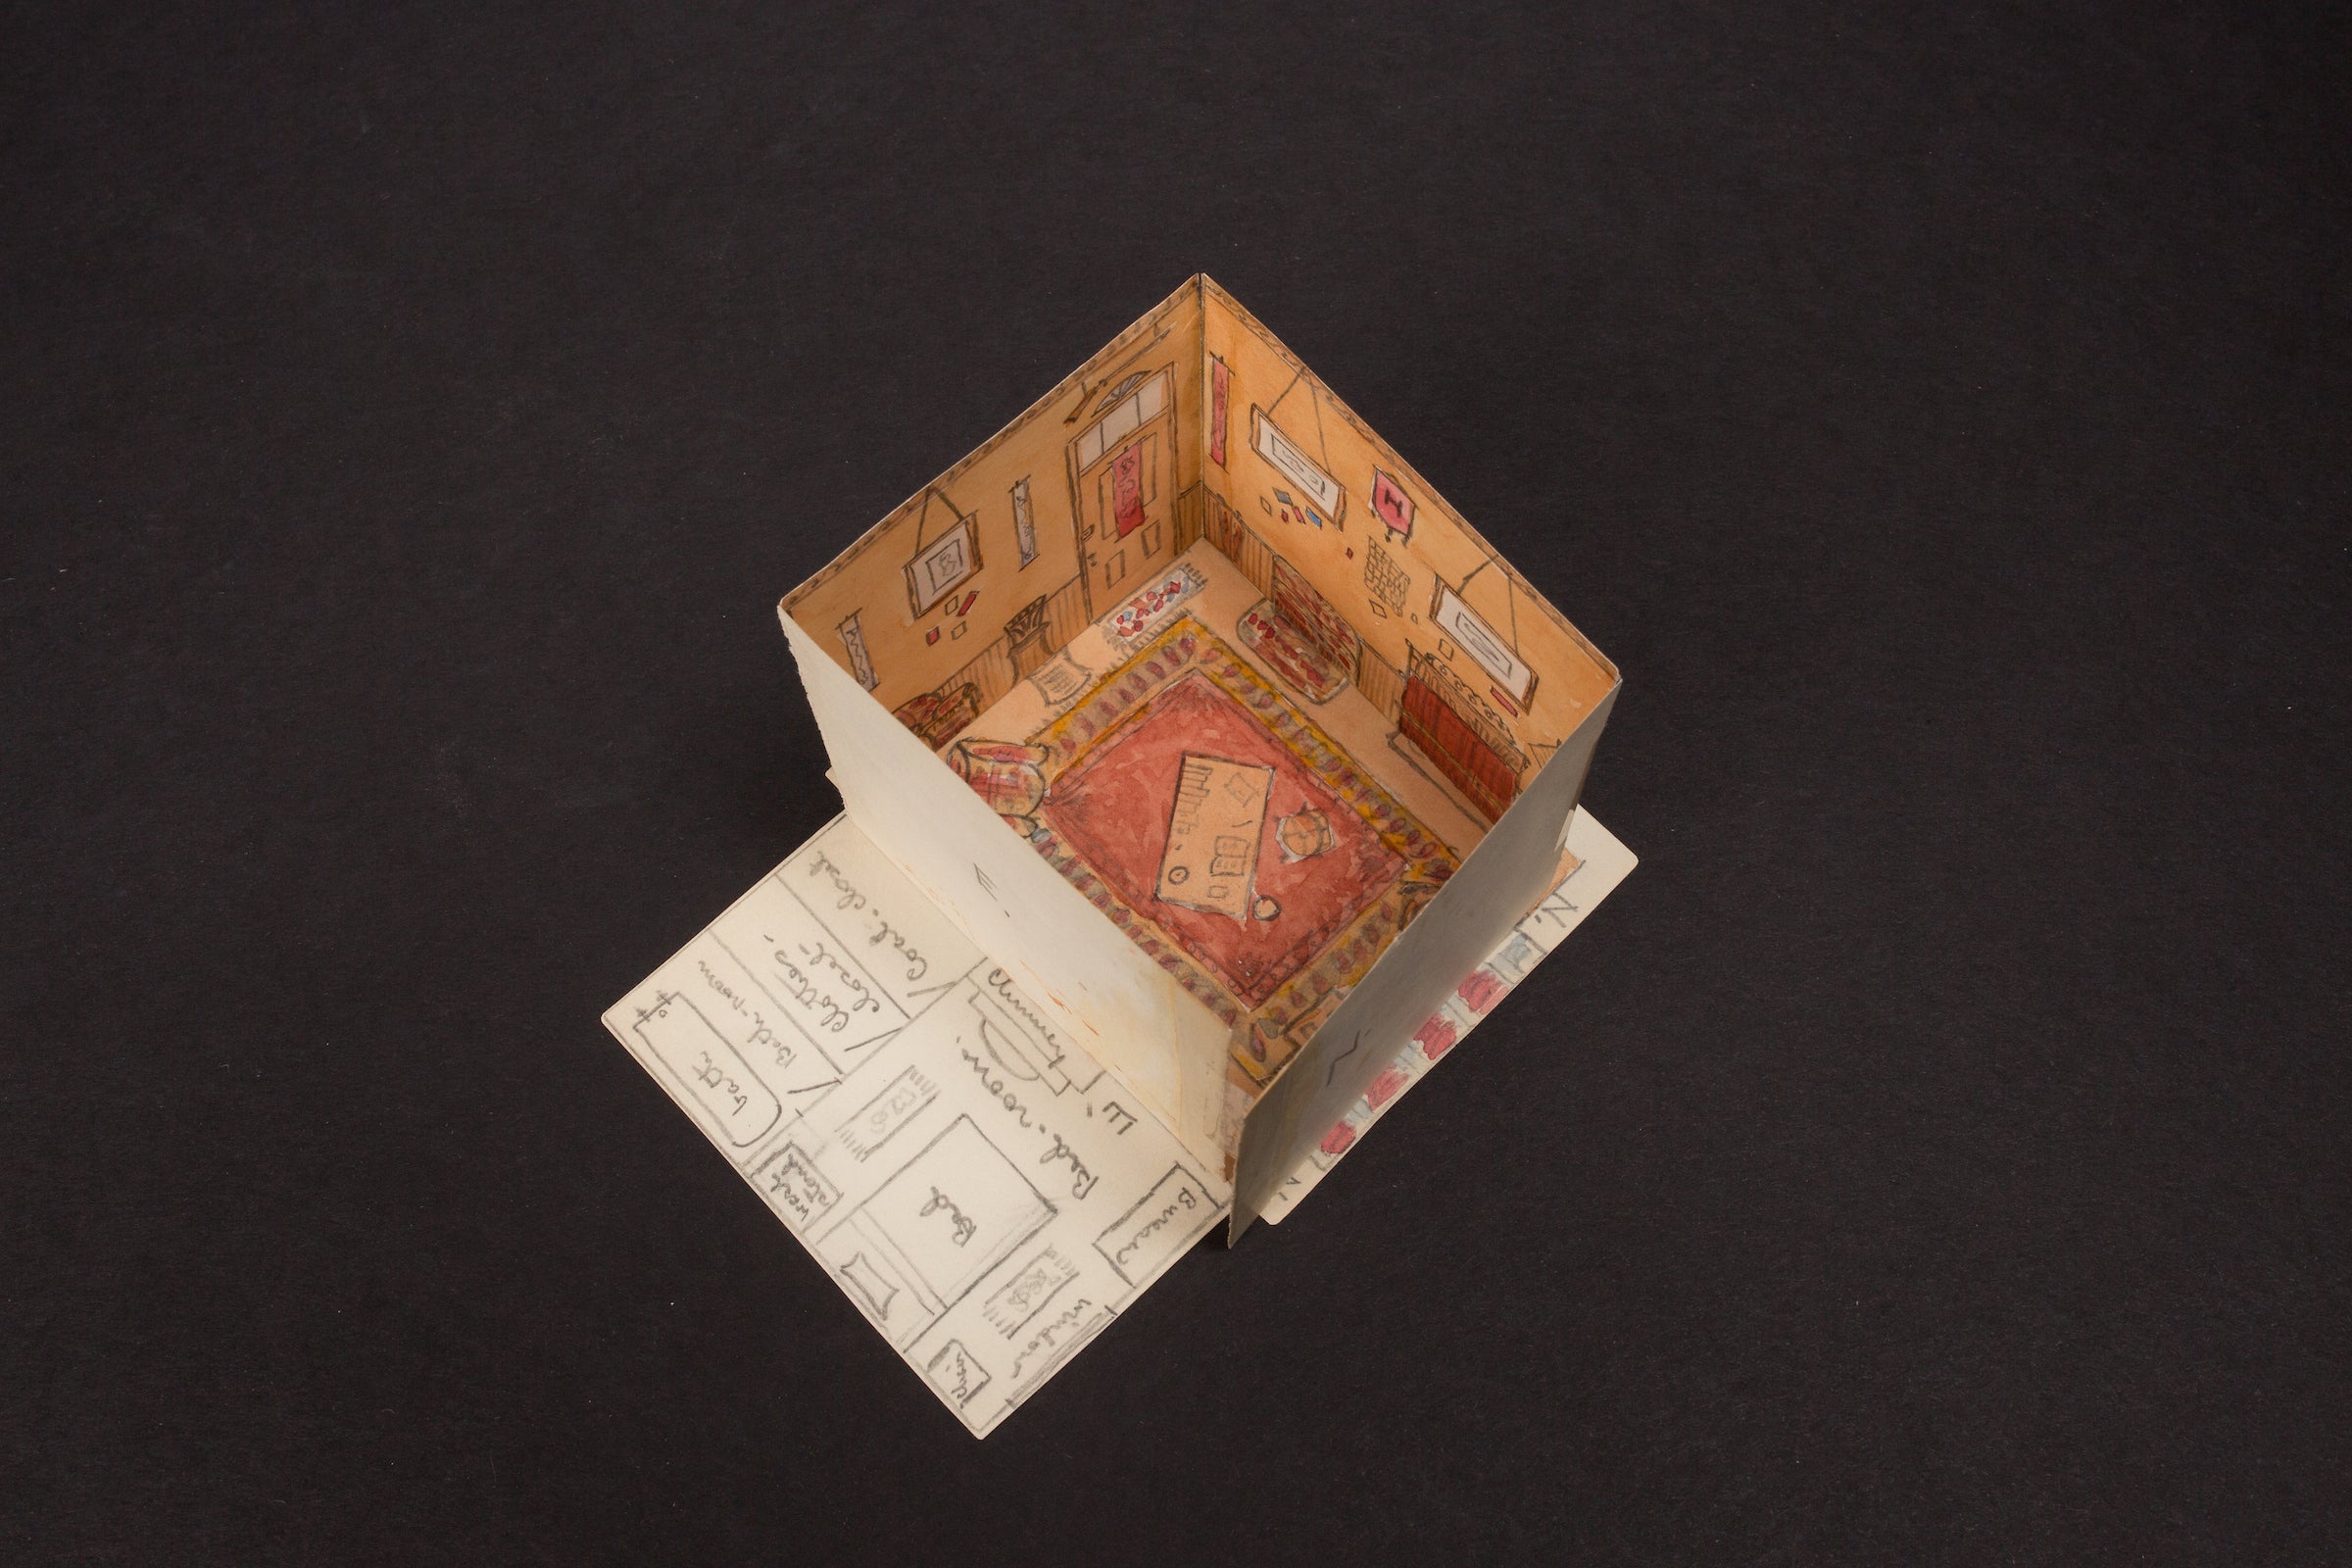 Photo of a model of a Dorm Room by Philip Welton Stanford